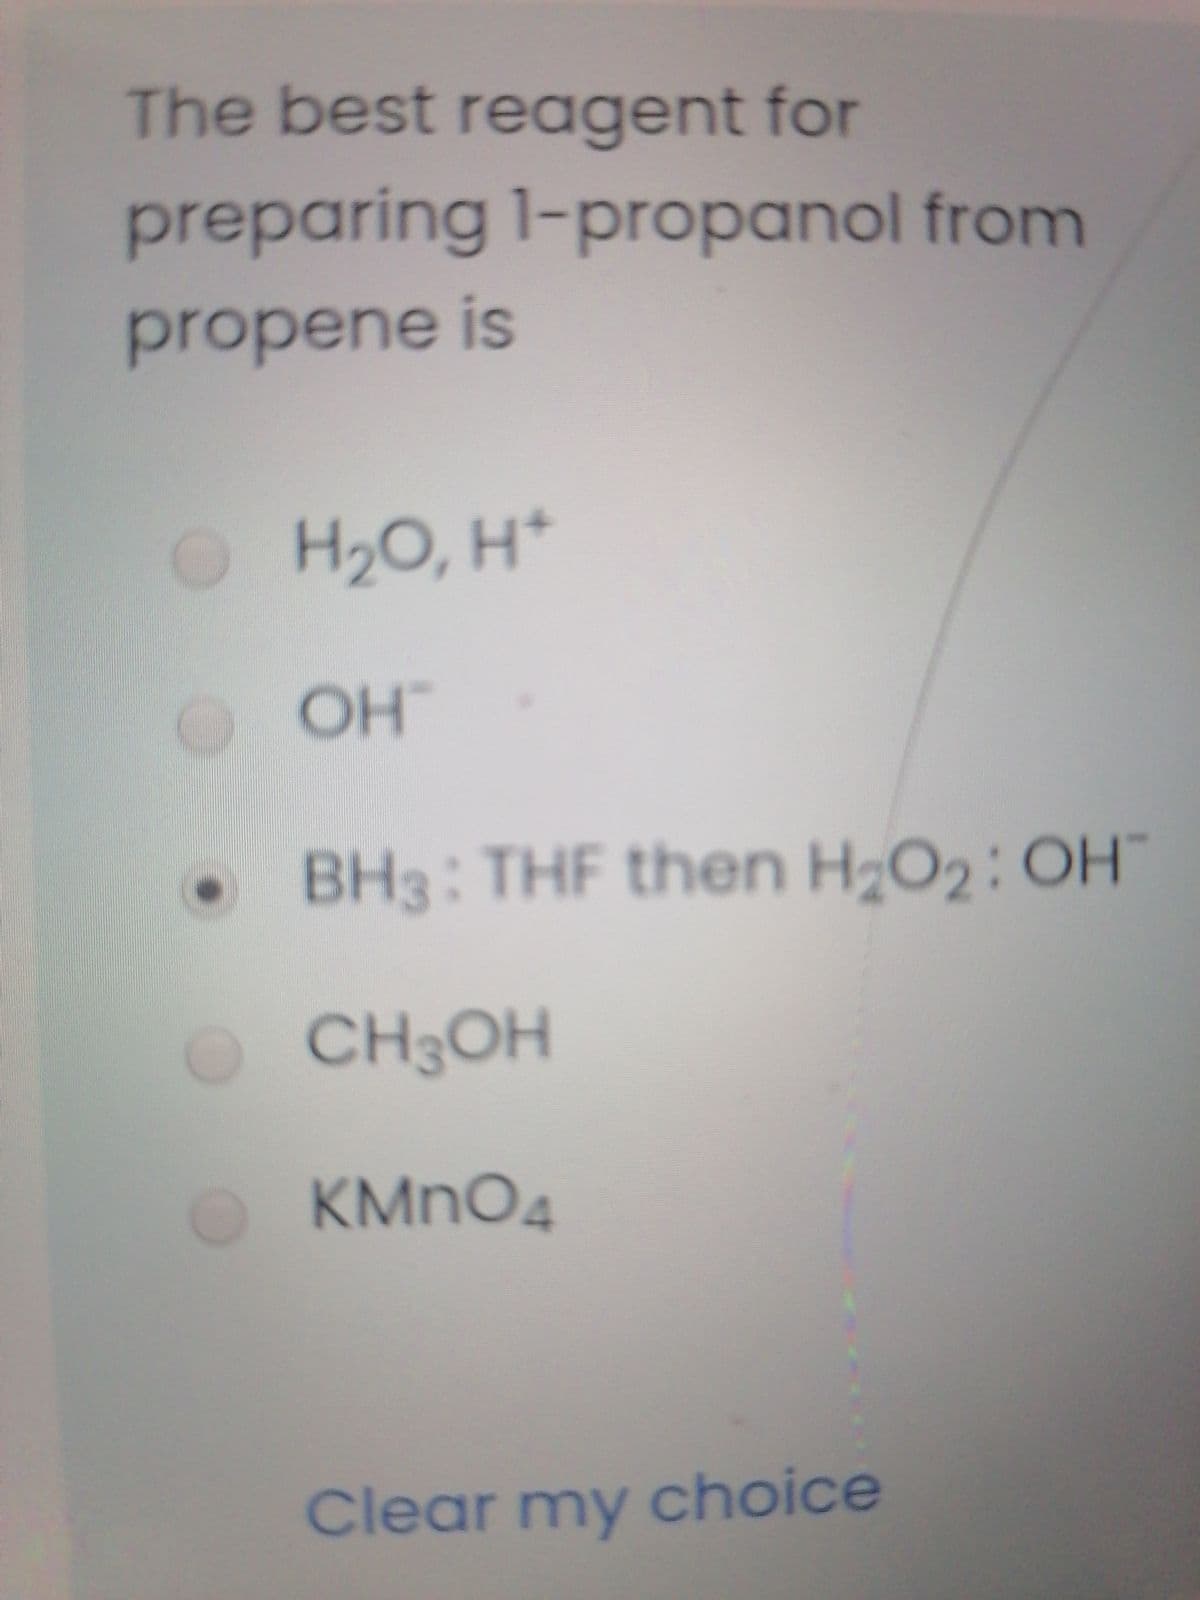 The best reagent for
preparing 1-propanol from
propene is
OH2O, H*
OH"
• BH3: THF then HO2: OH
OCH3OH
O KMNO4
Clear my choice
